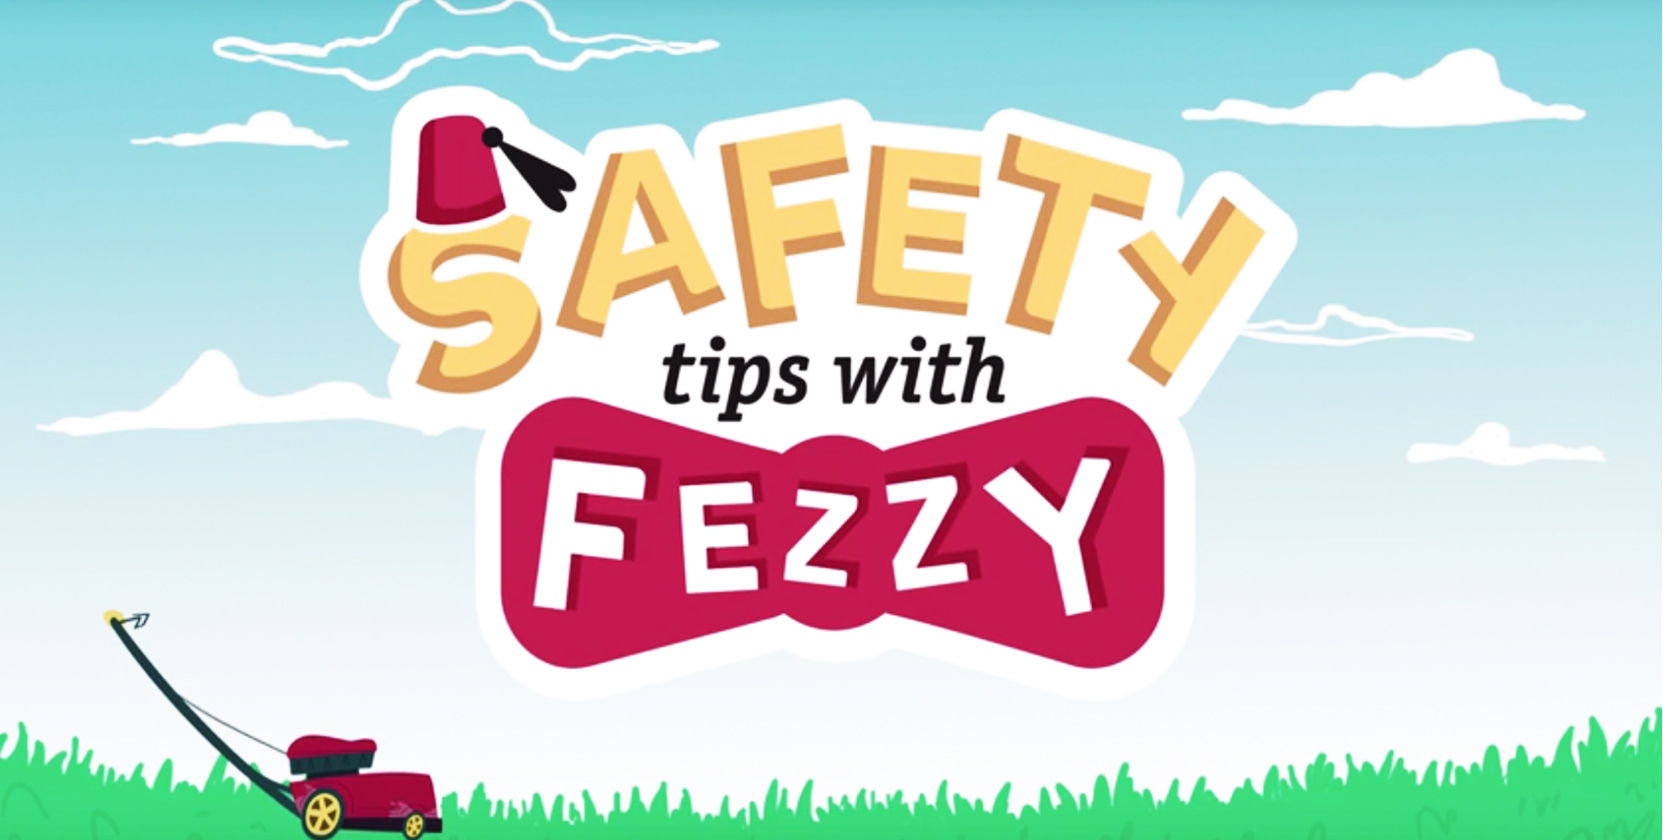 Safety tips with Fezzy